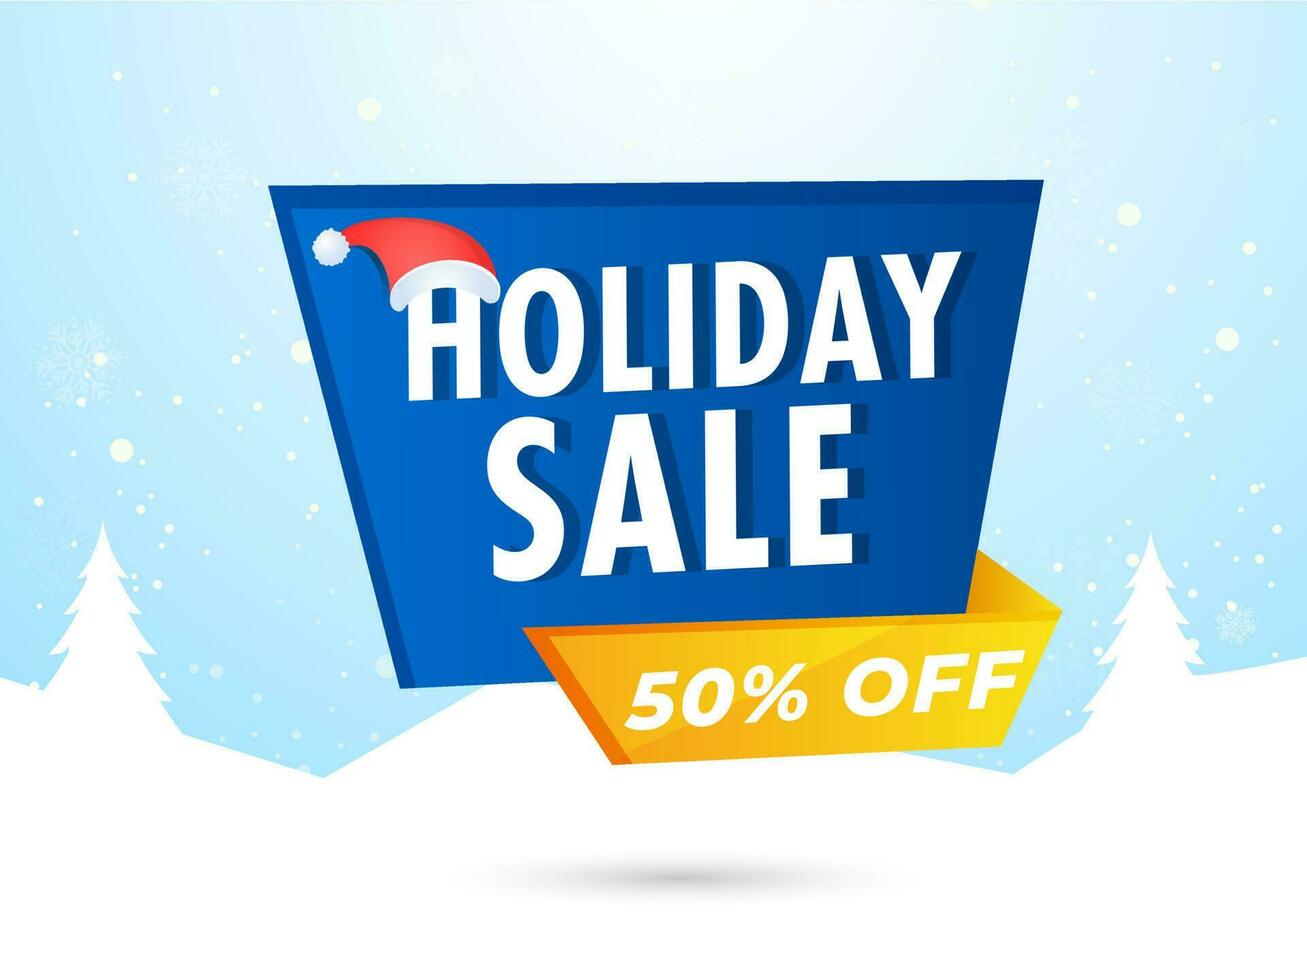 Holiday Sale banner or poster design with santa hat and discount offer on snowy landscape background. vector